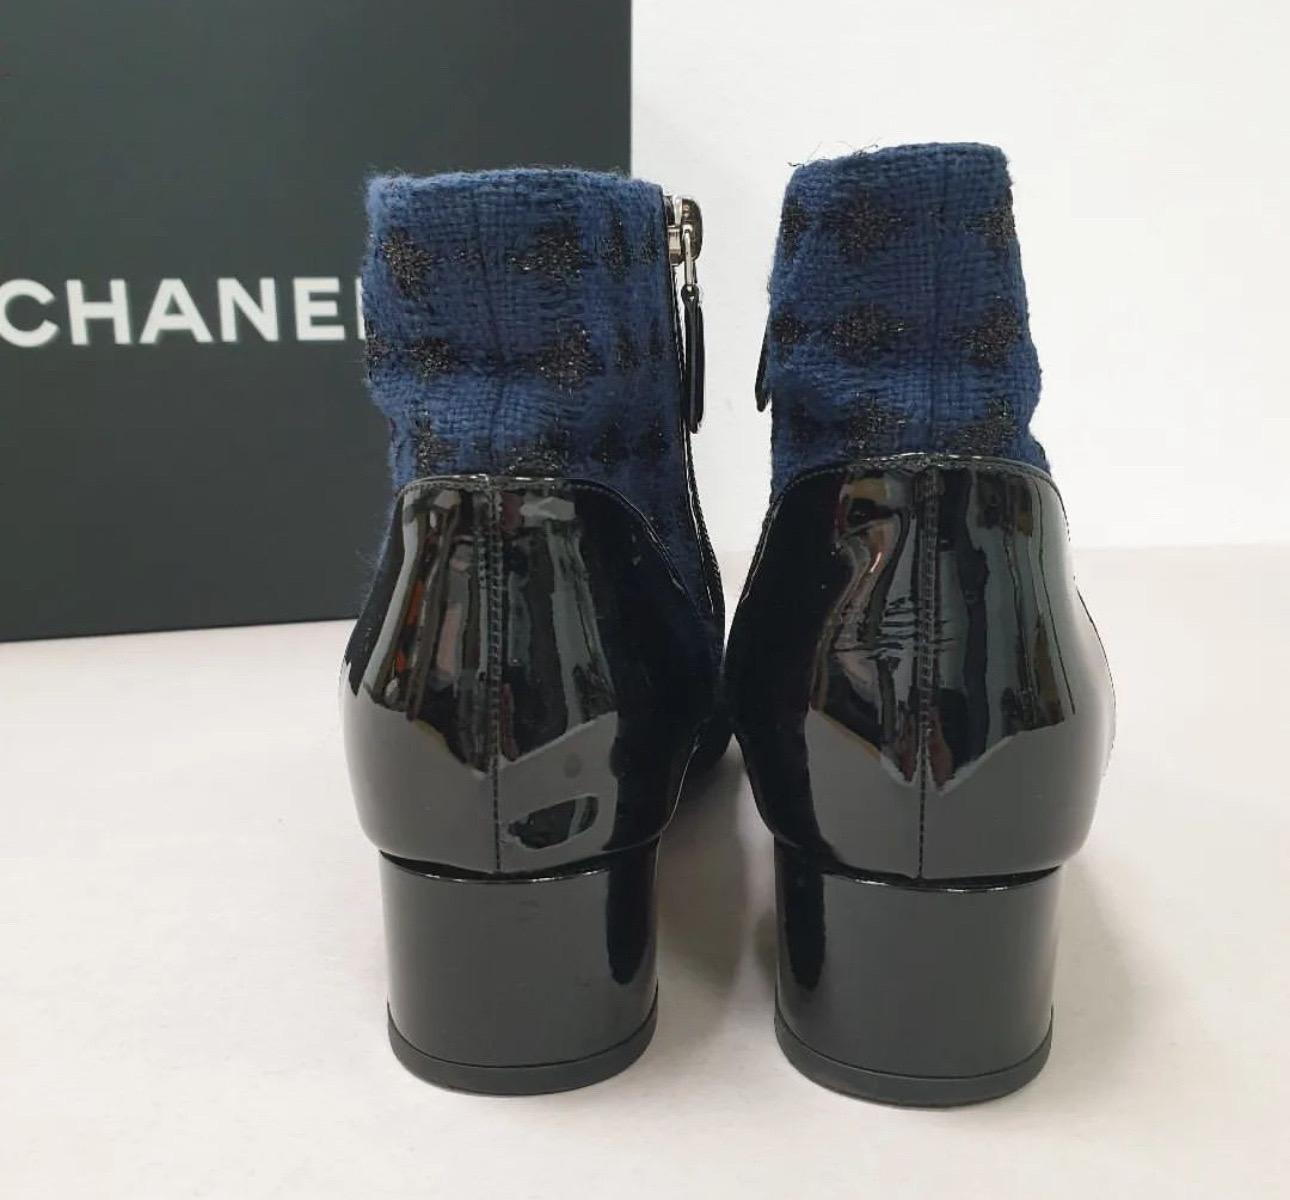 Women's Chanel Tweed Patent Leather Ankle Boots